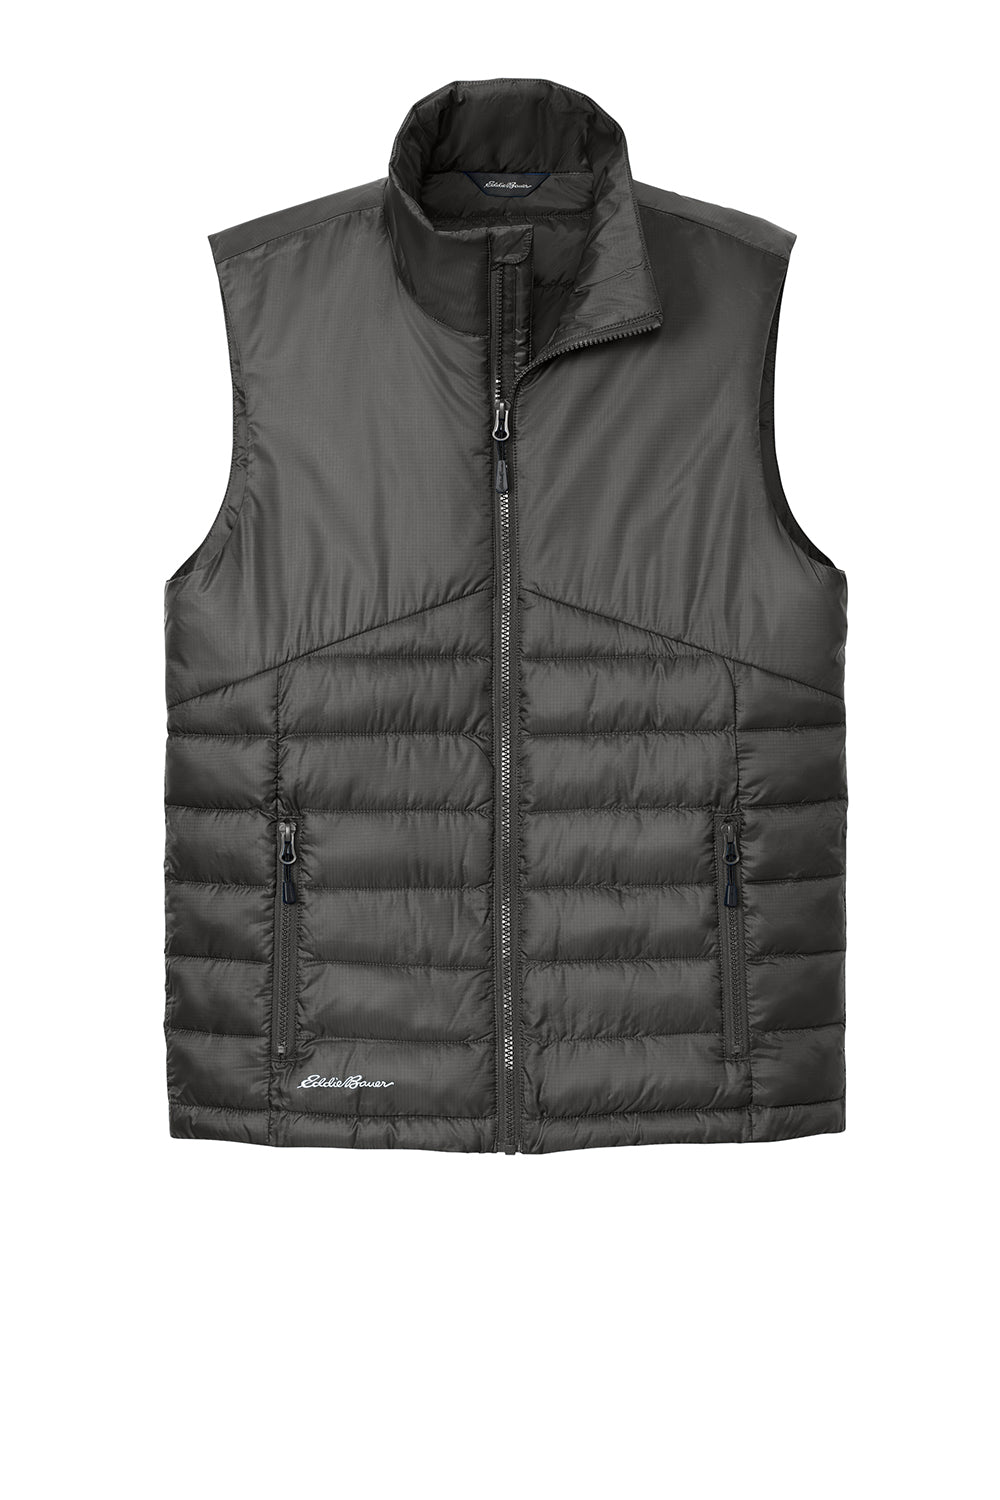 Eddie Bauer EB512 Mens Water Resistant Quilted Full Zip Vest Iron Gate Grey Flat Front